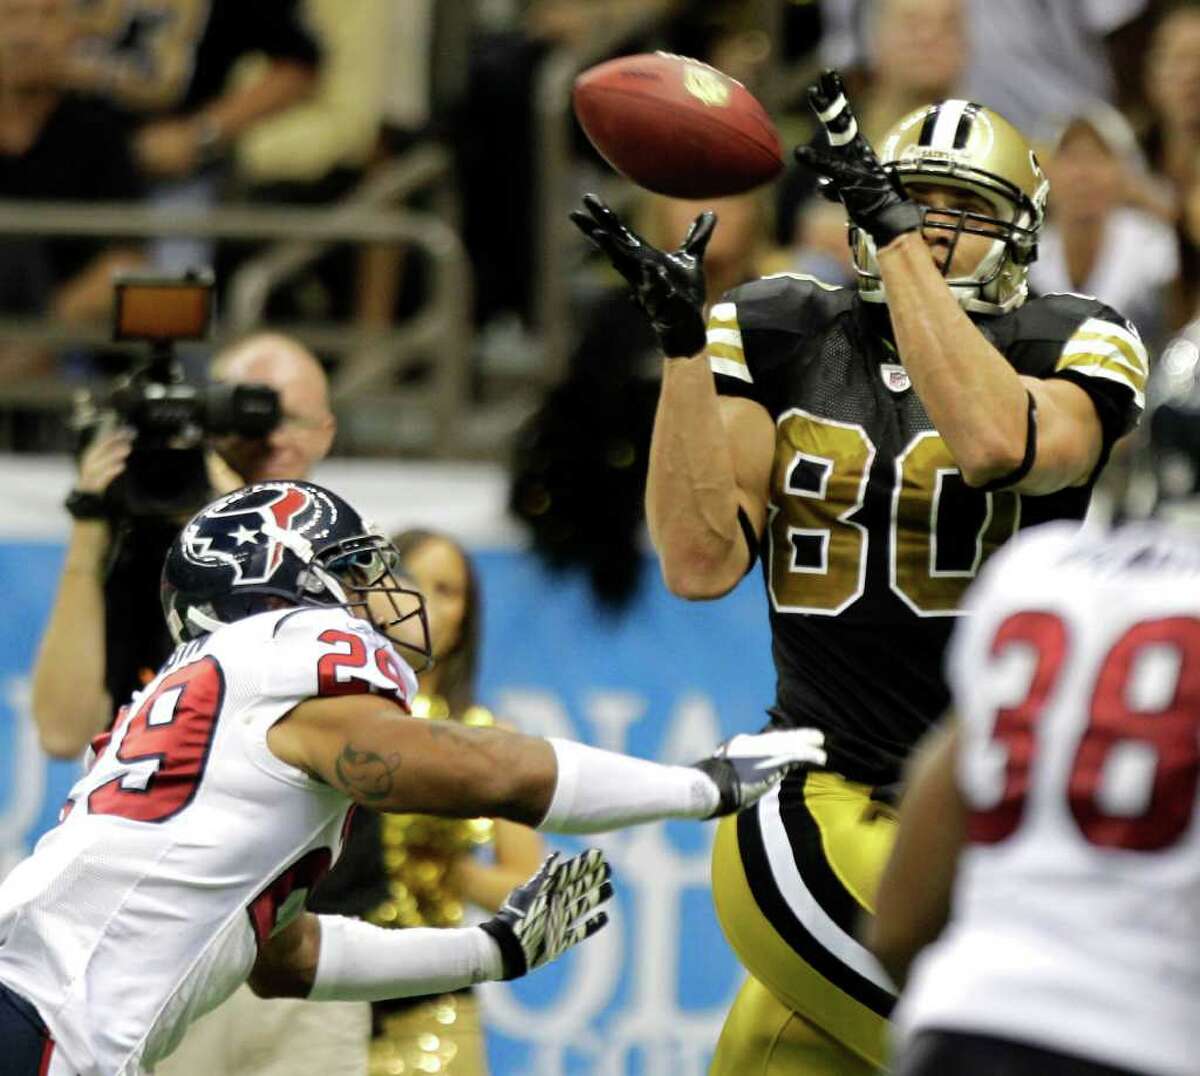 New Orleans Saints tight end Jimmy Graham (80) beats Houston Texans strong safety Glover Quin (29) for a 27-yard touchdown reception during the fourth quarter of an NFL football game at the Louisiana Superdome Sunday, Sept. 25, 2011, New Orleans. The Saints beat the Texans 40-33.